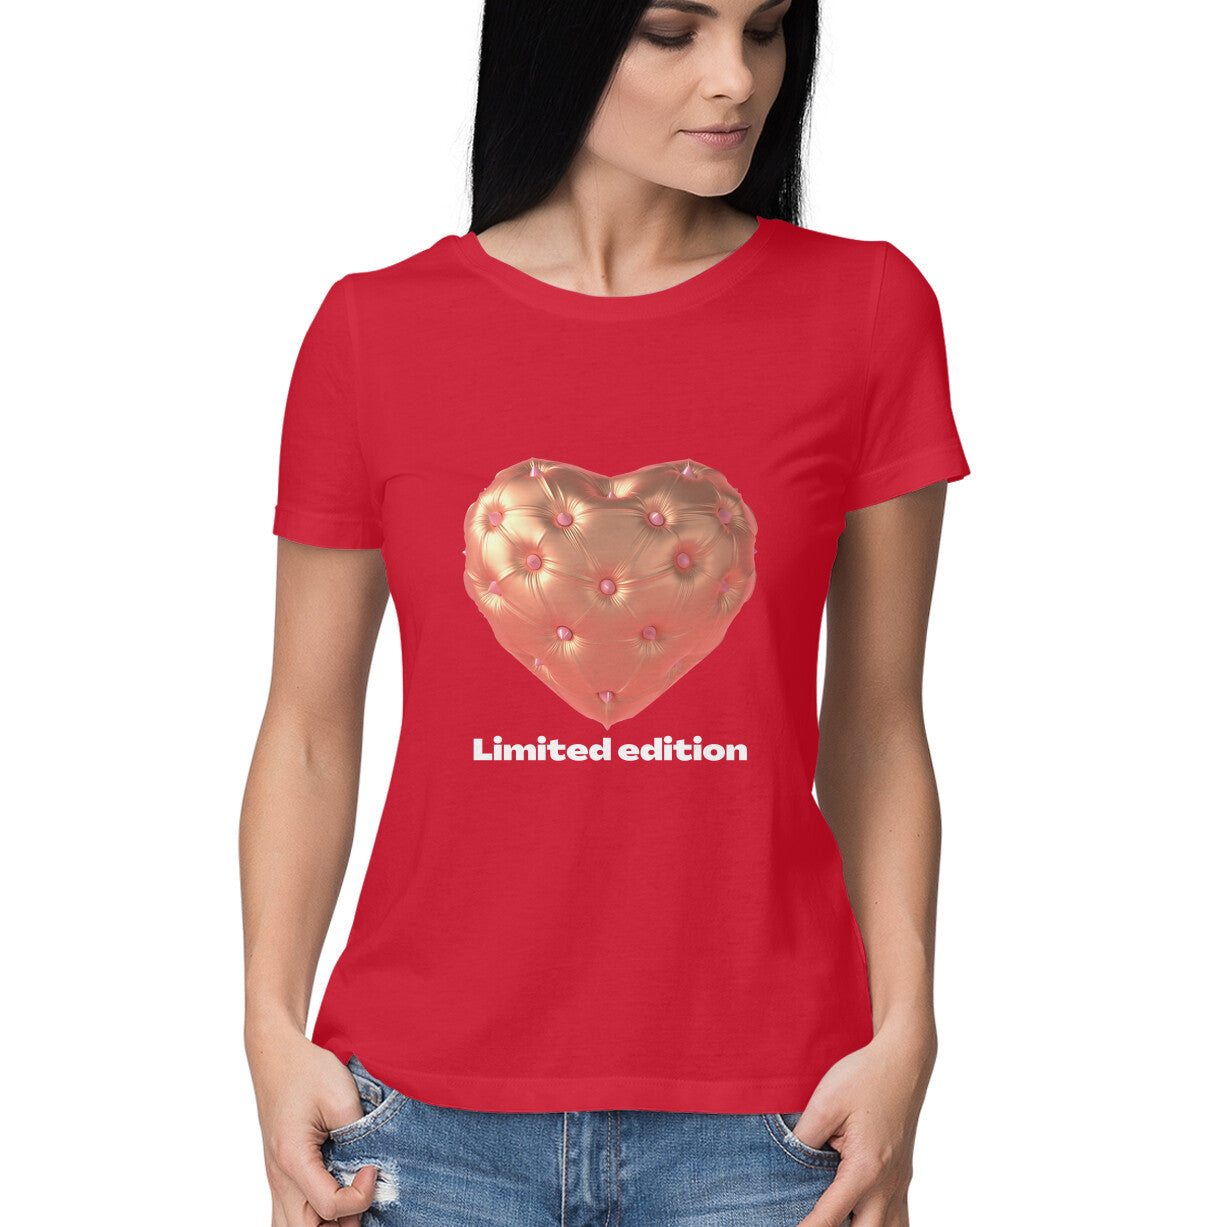 Limited edition in dark colors Women's tee